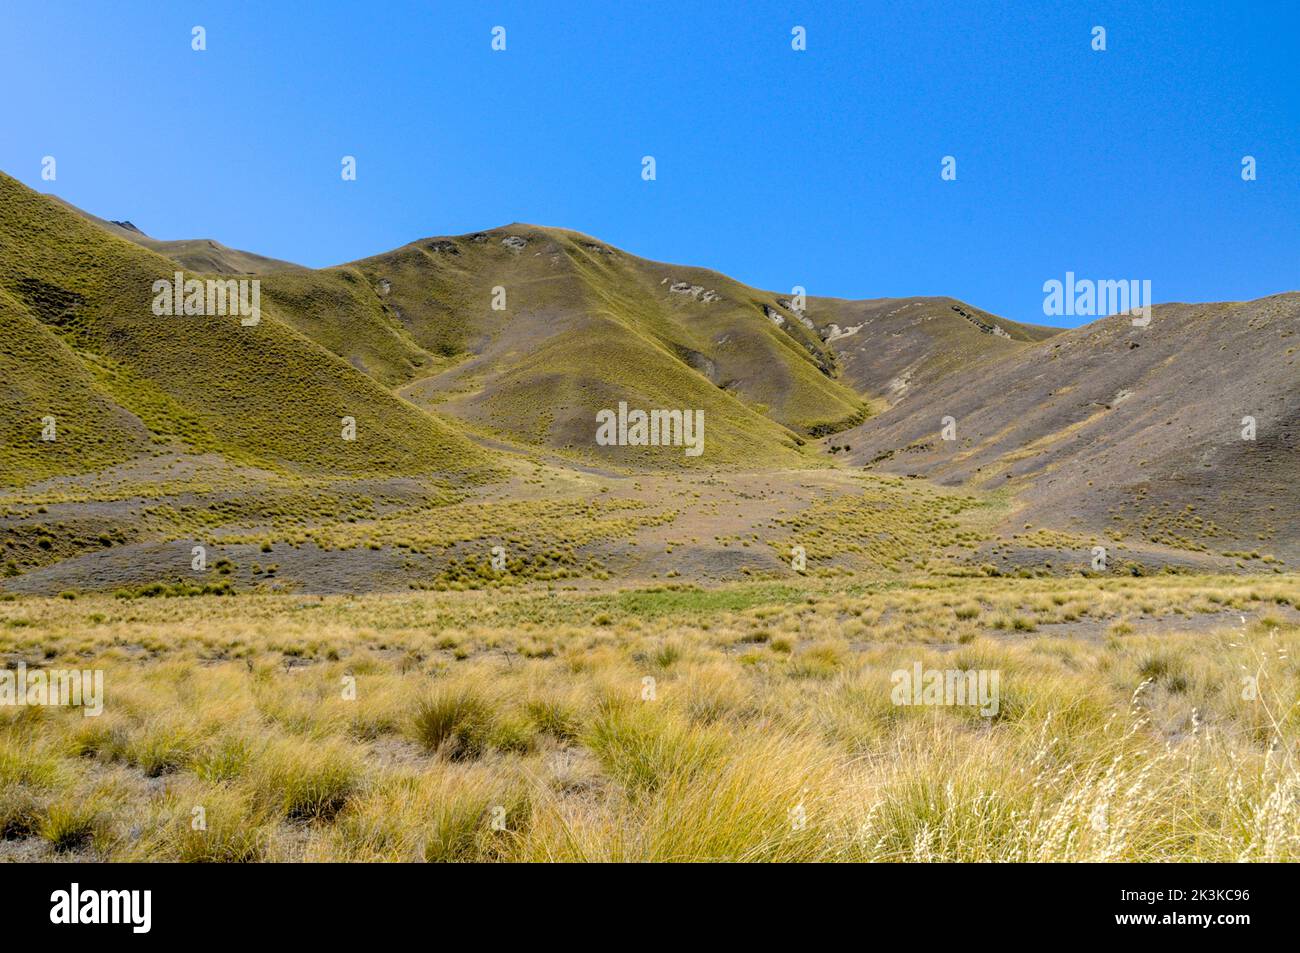 Lindis Pass, a mountainous road (Highway 8) across a barren landscape of tussock grasslands in the Lindis Pass Scenic Reserve in the ecoregion of Sout Stock Photo